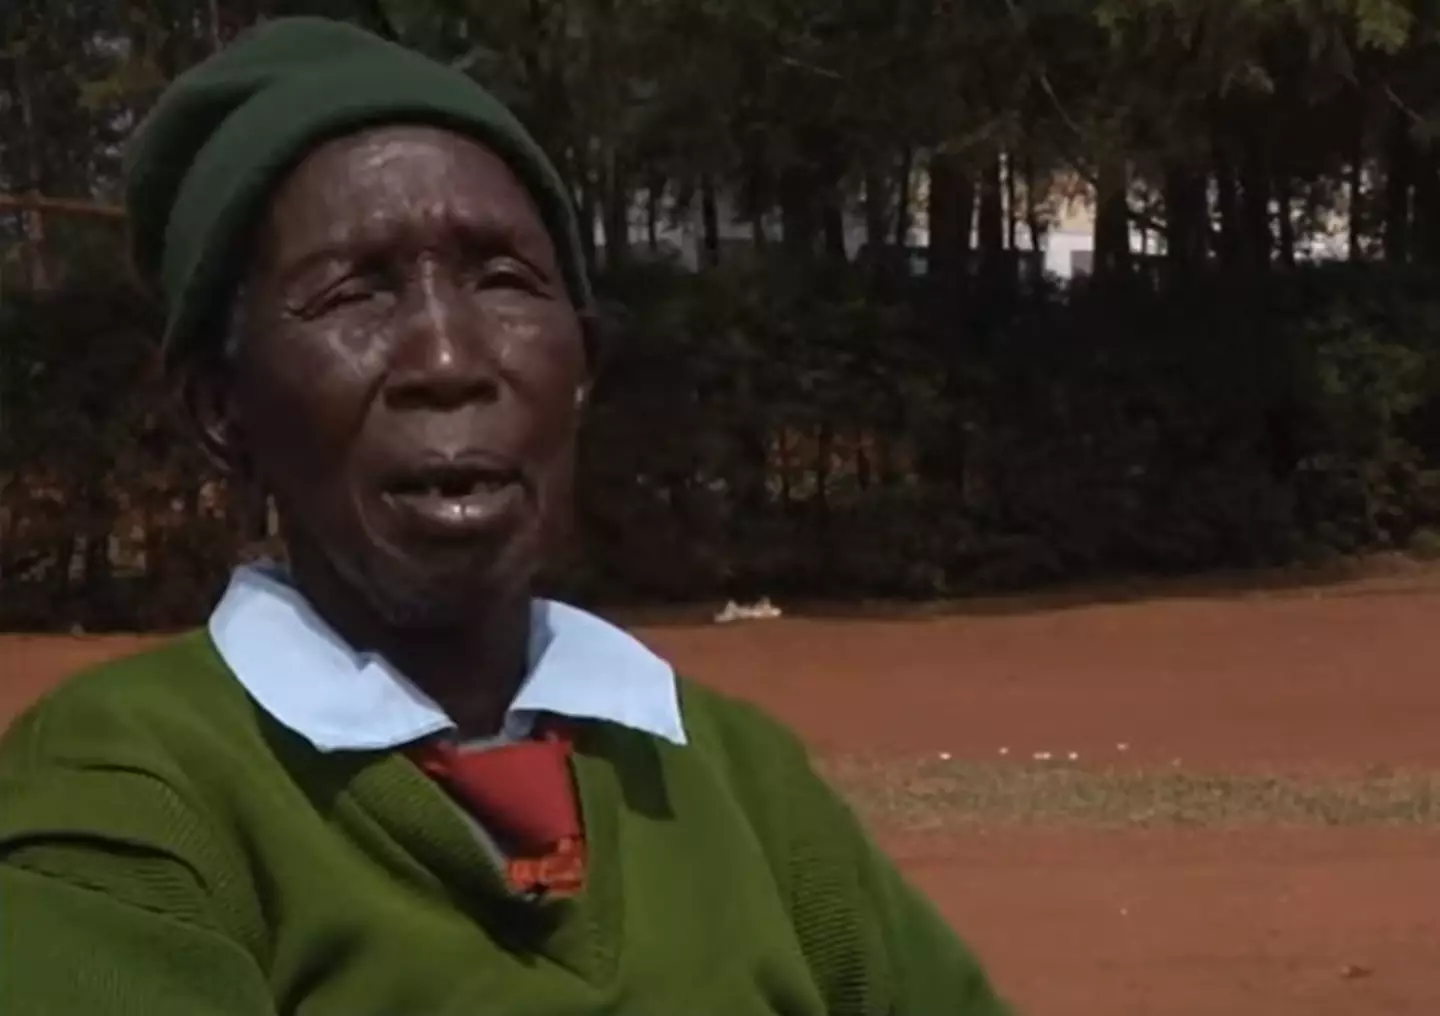 Affectionately known as 'Gogo' by her classmates, Priscilla inspired others to go and get their education.